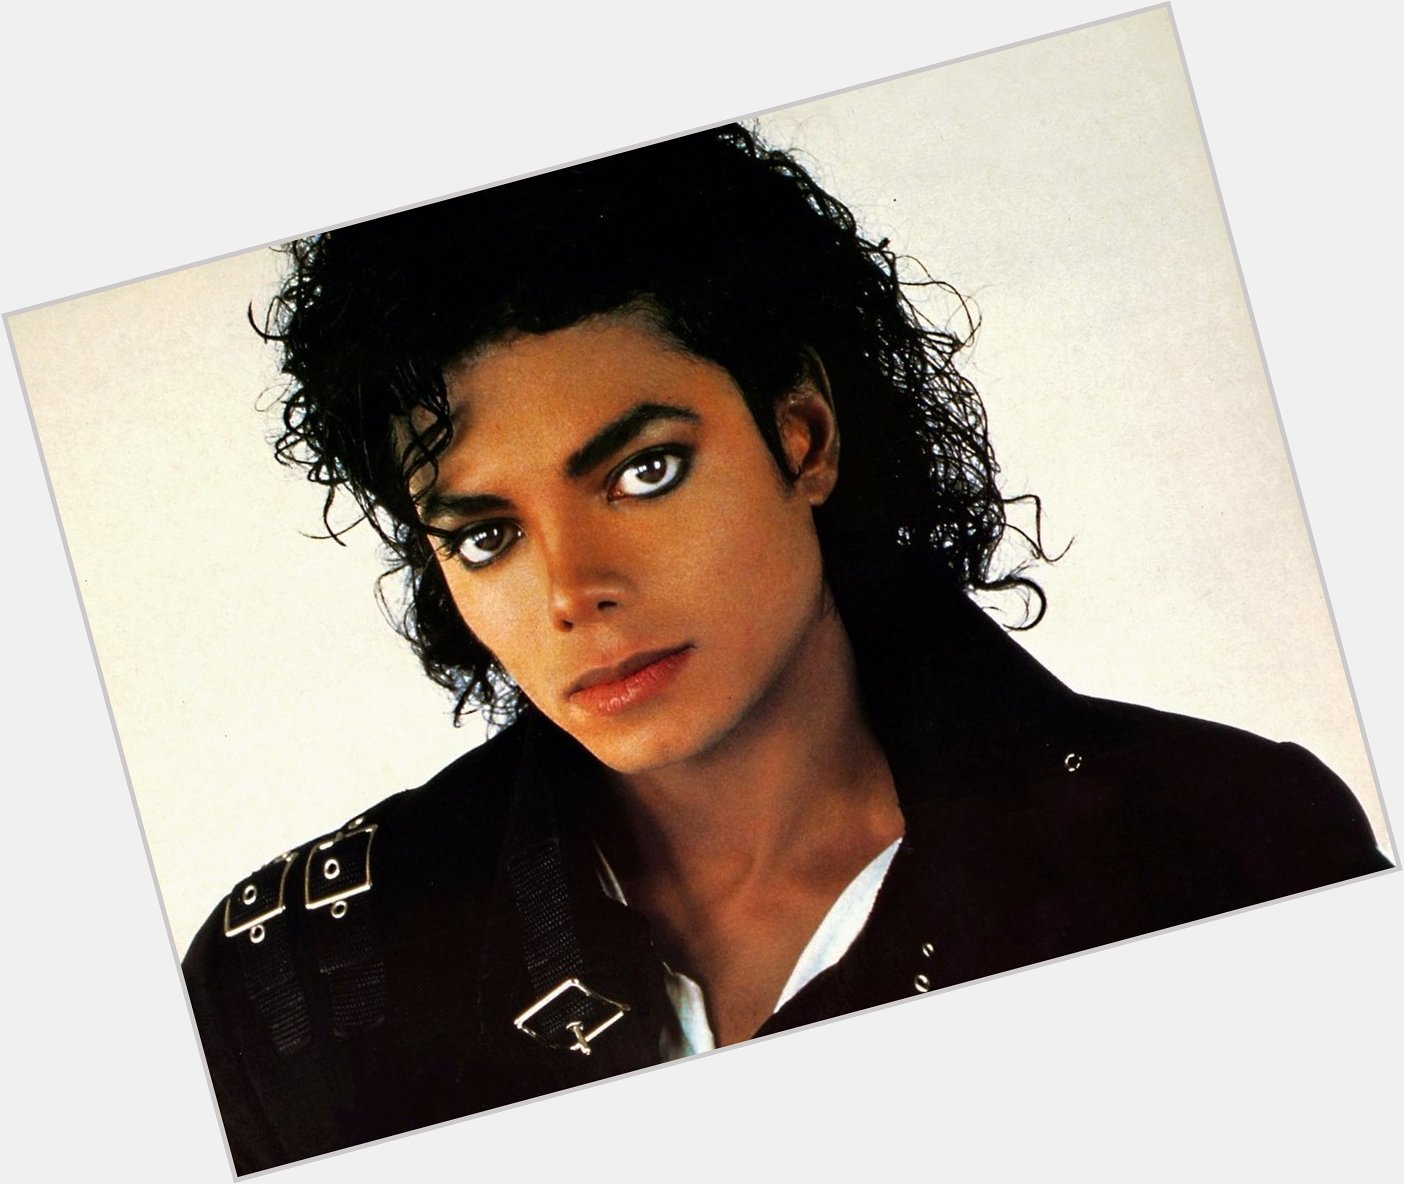 \"Thank you for composing one of my favorite games. Happy birthday Michael Jackson.\"  